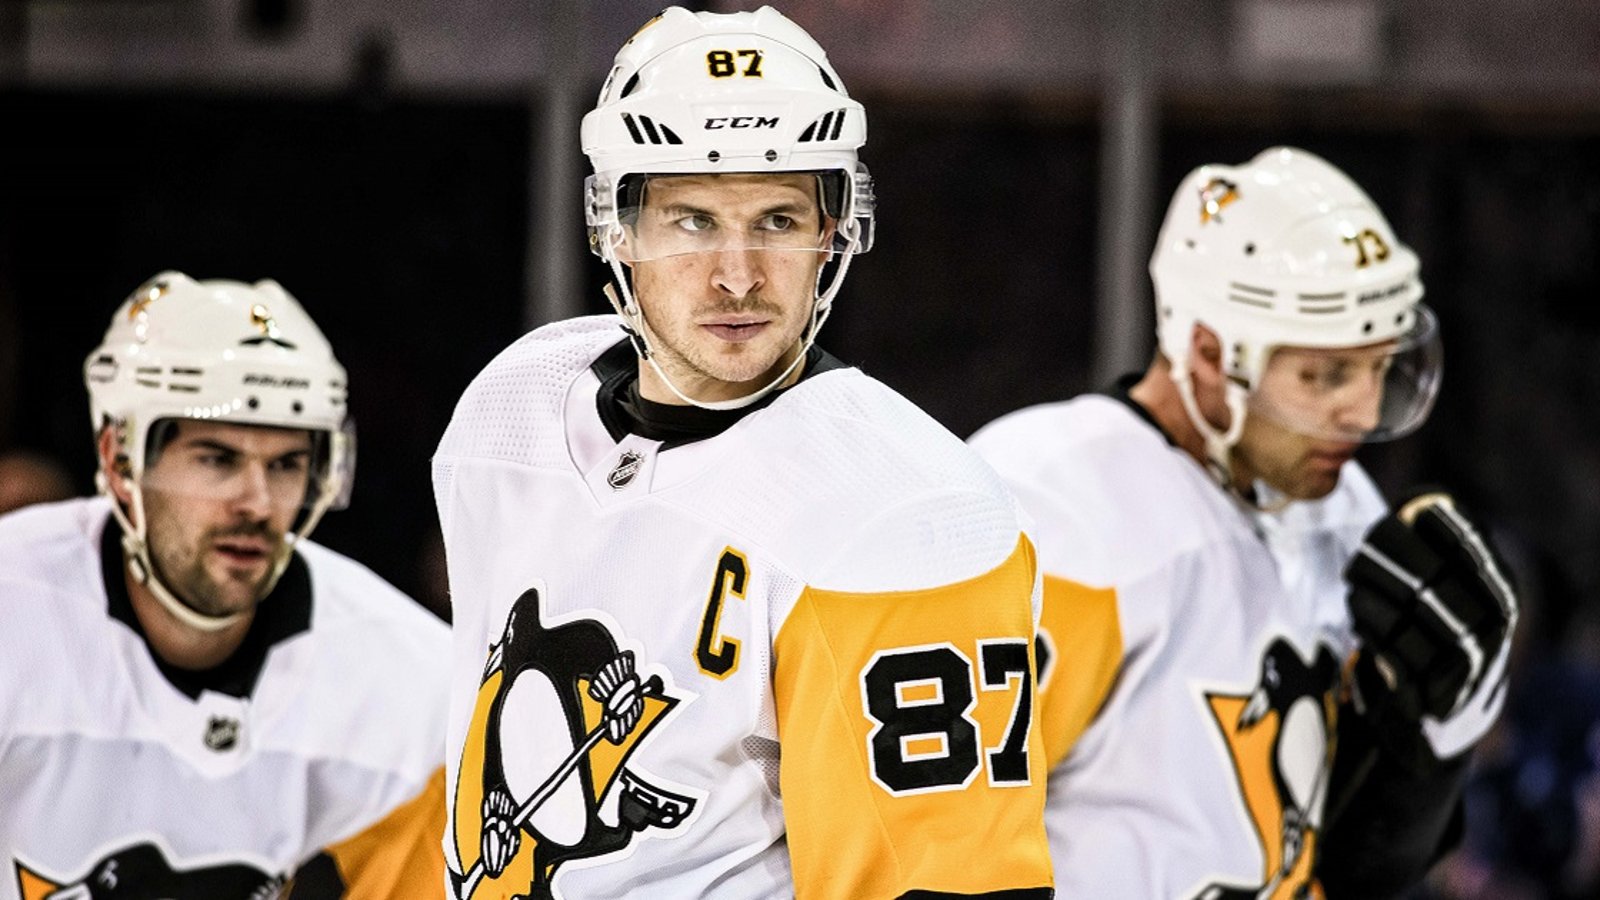 Sidney Crosby makes unbelievable donation to the local food bank.